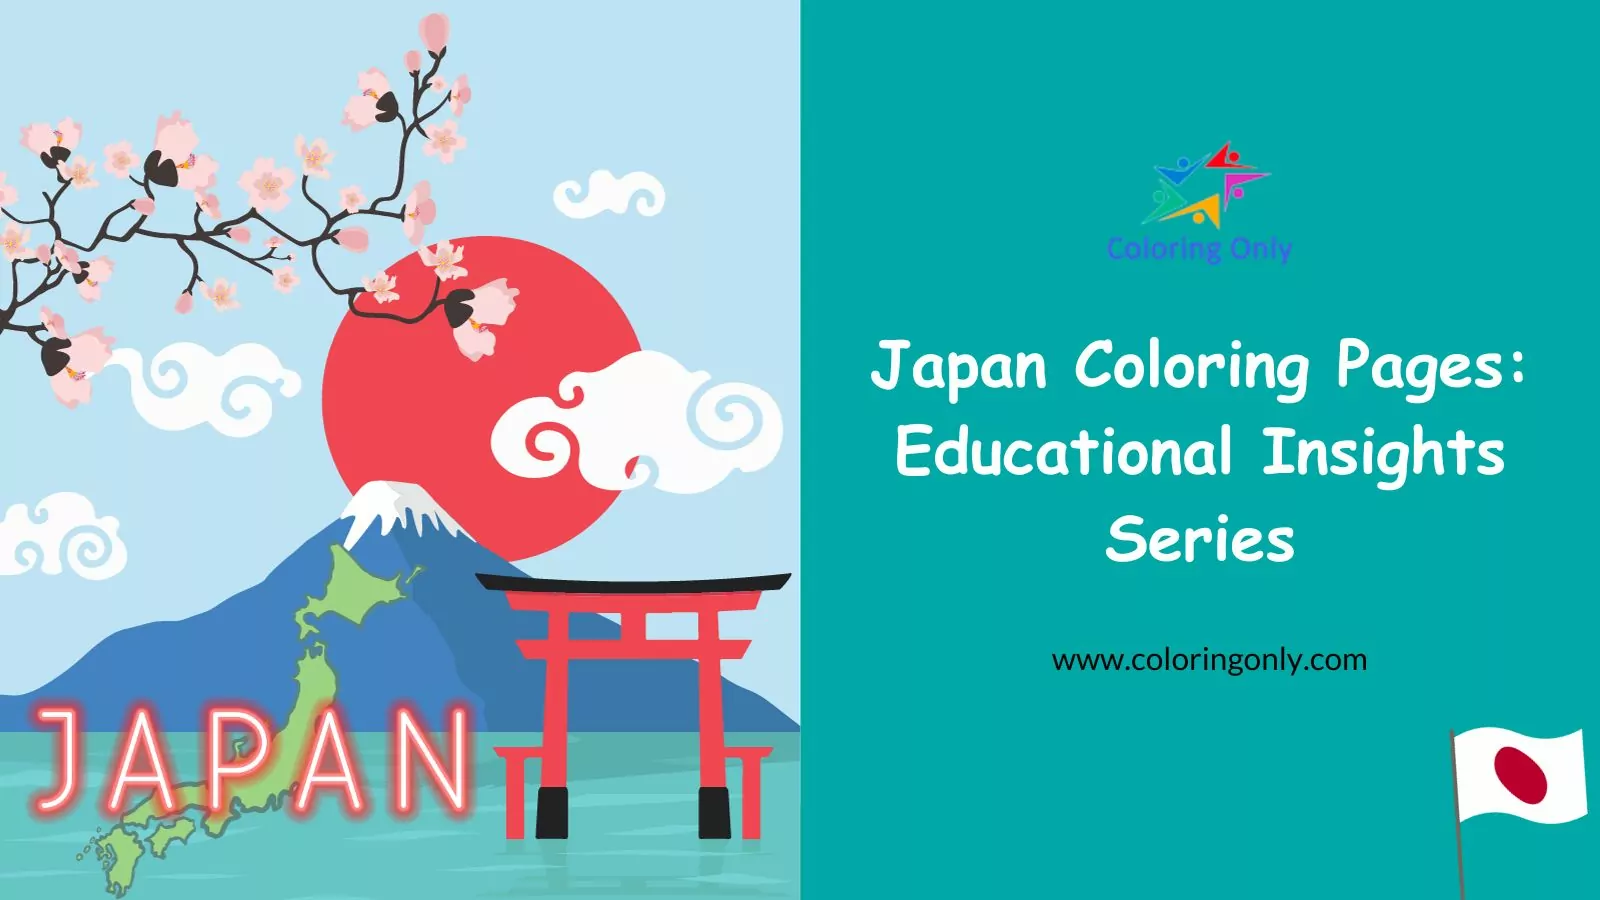 Japan Coloring Pages: Educational Insights Series